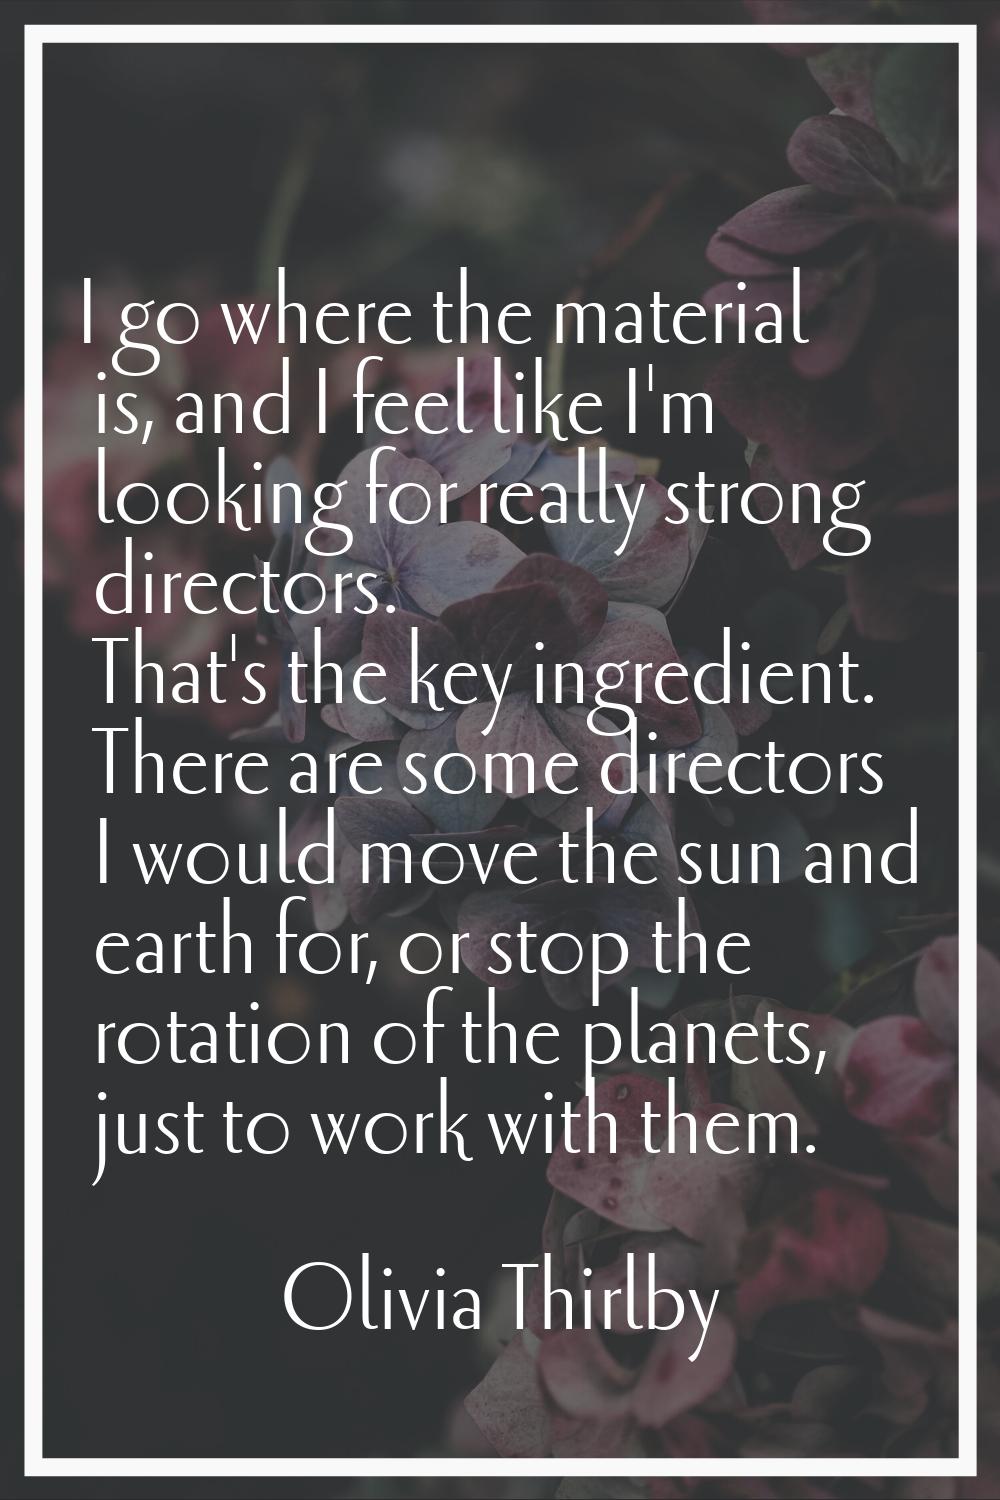 I go where the material is, and I feel like I'm looking for really strong directors. That's the key